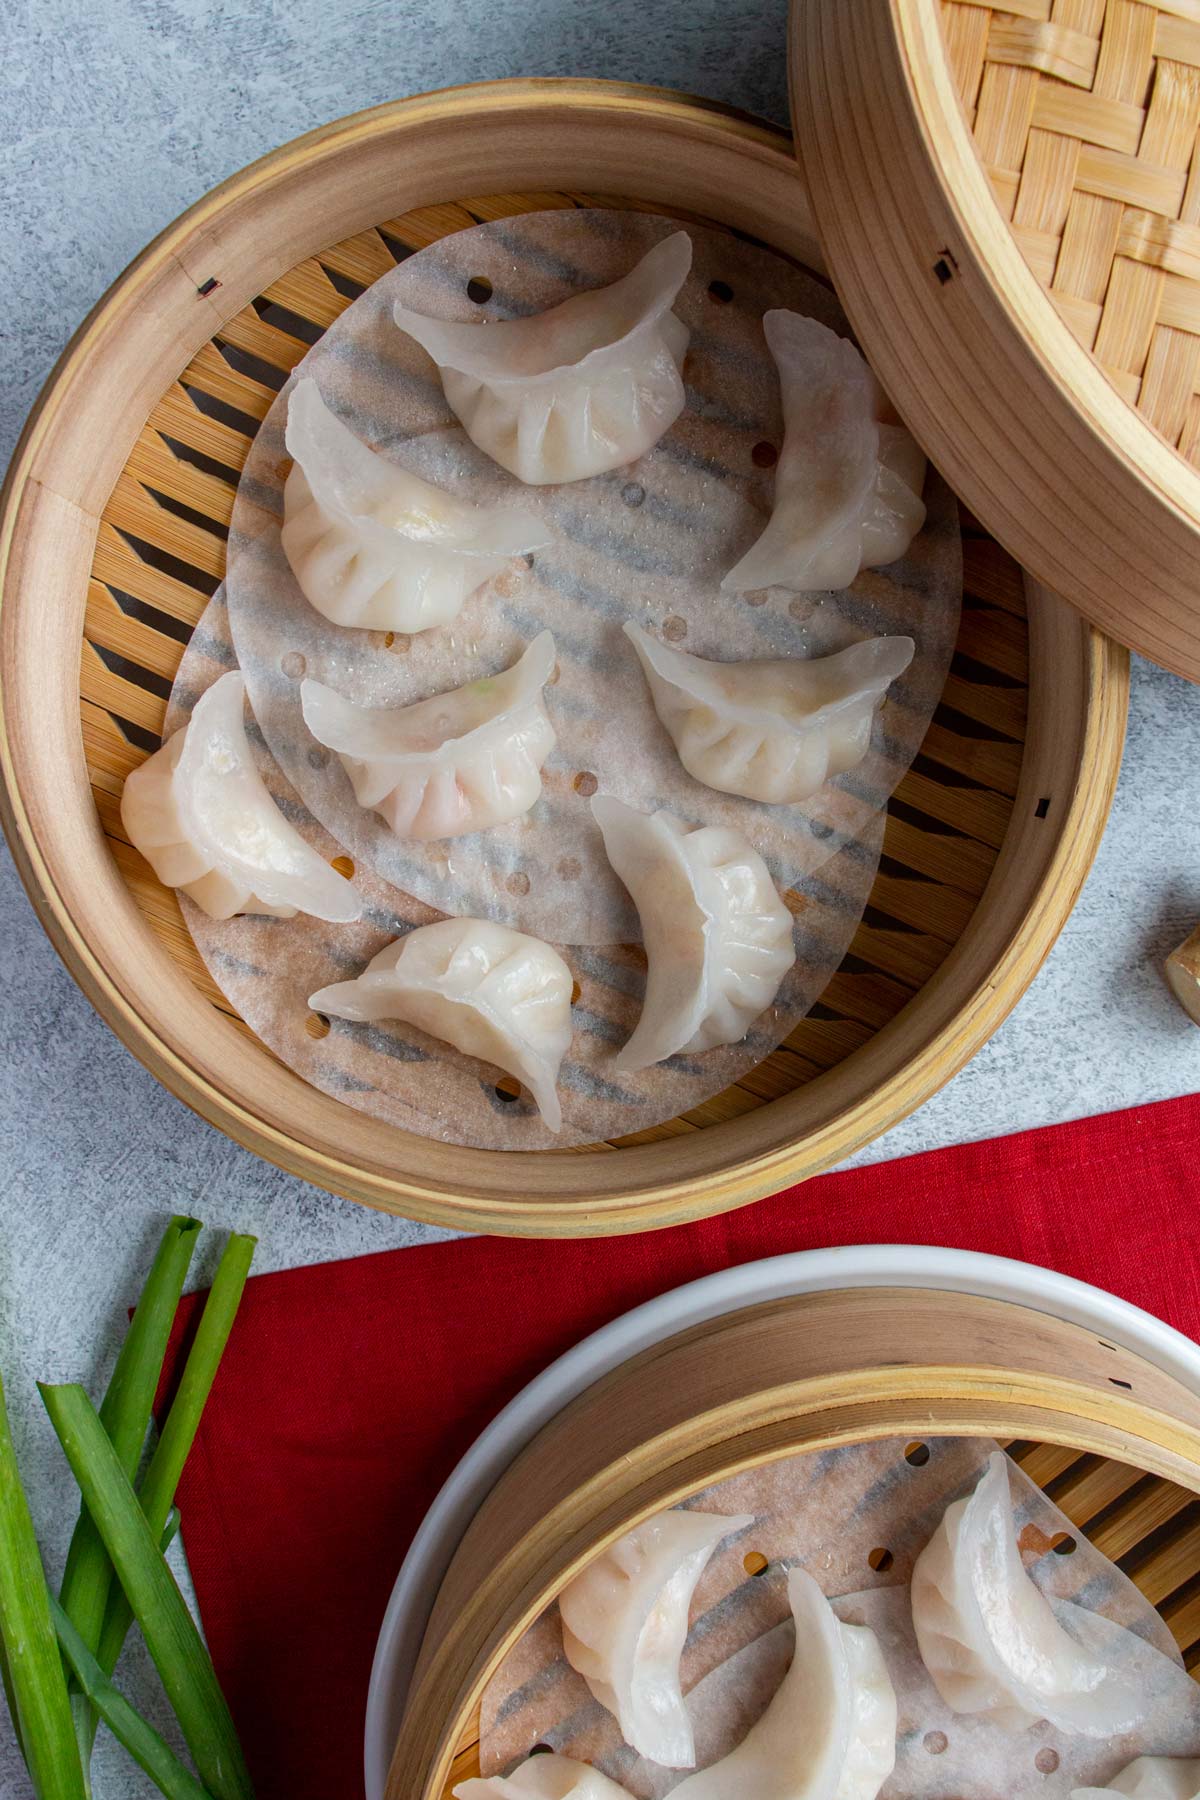 Two bamboo steamer baskets filled with steamed dumplings with white translucent wrappers.